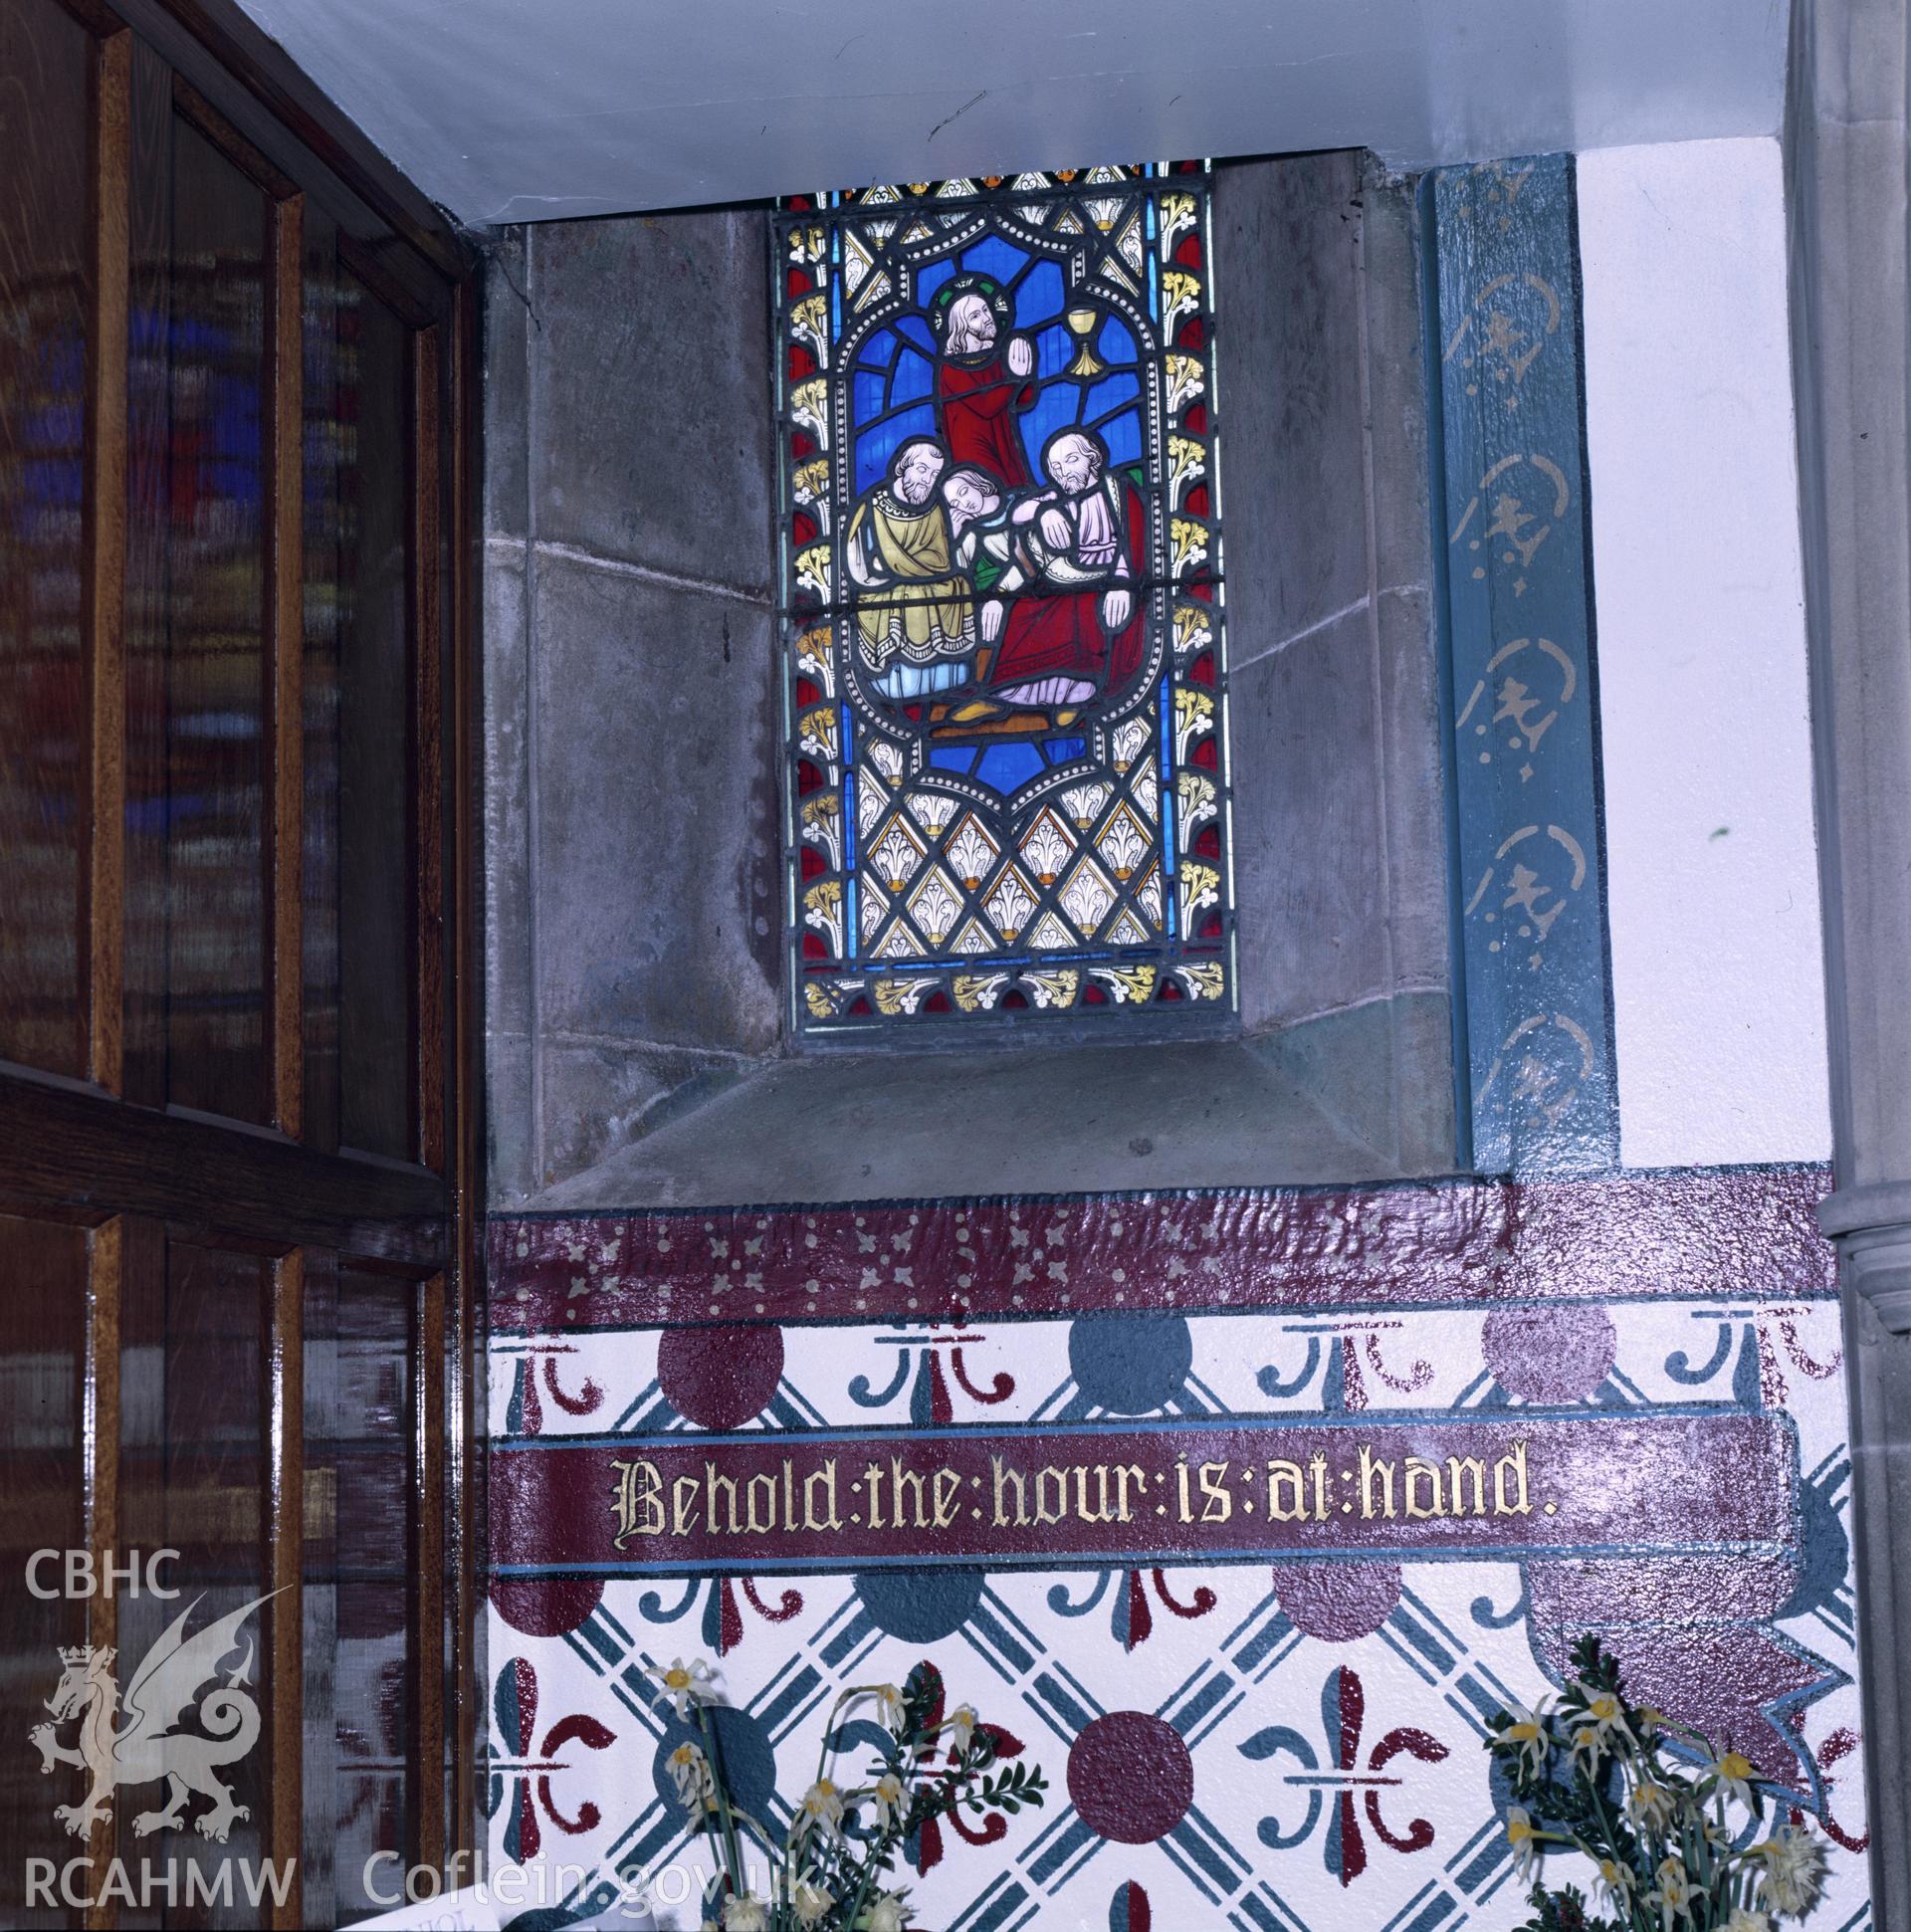 RCAHMW colour transparency showing stained glass at St John's Church, Penymynydd taken by A.J. Parkinson, 1987.